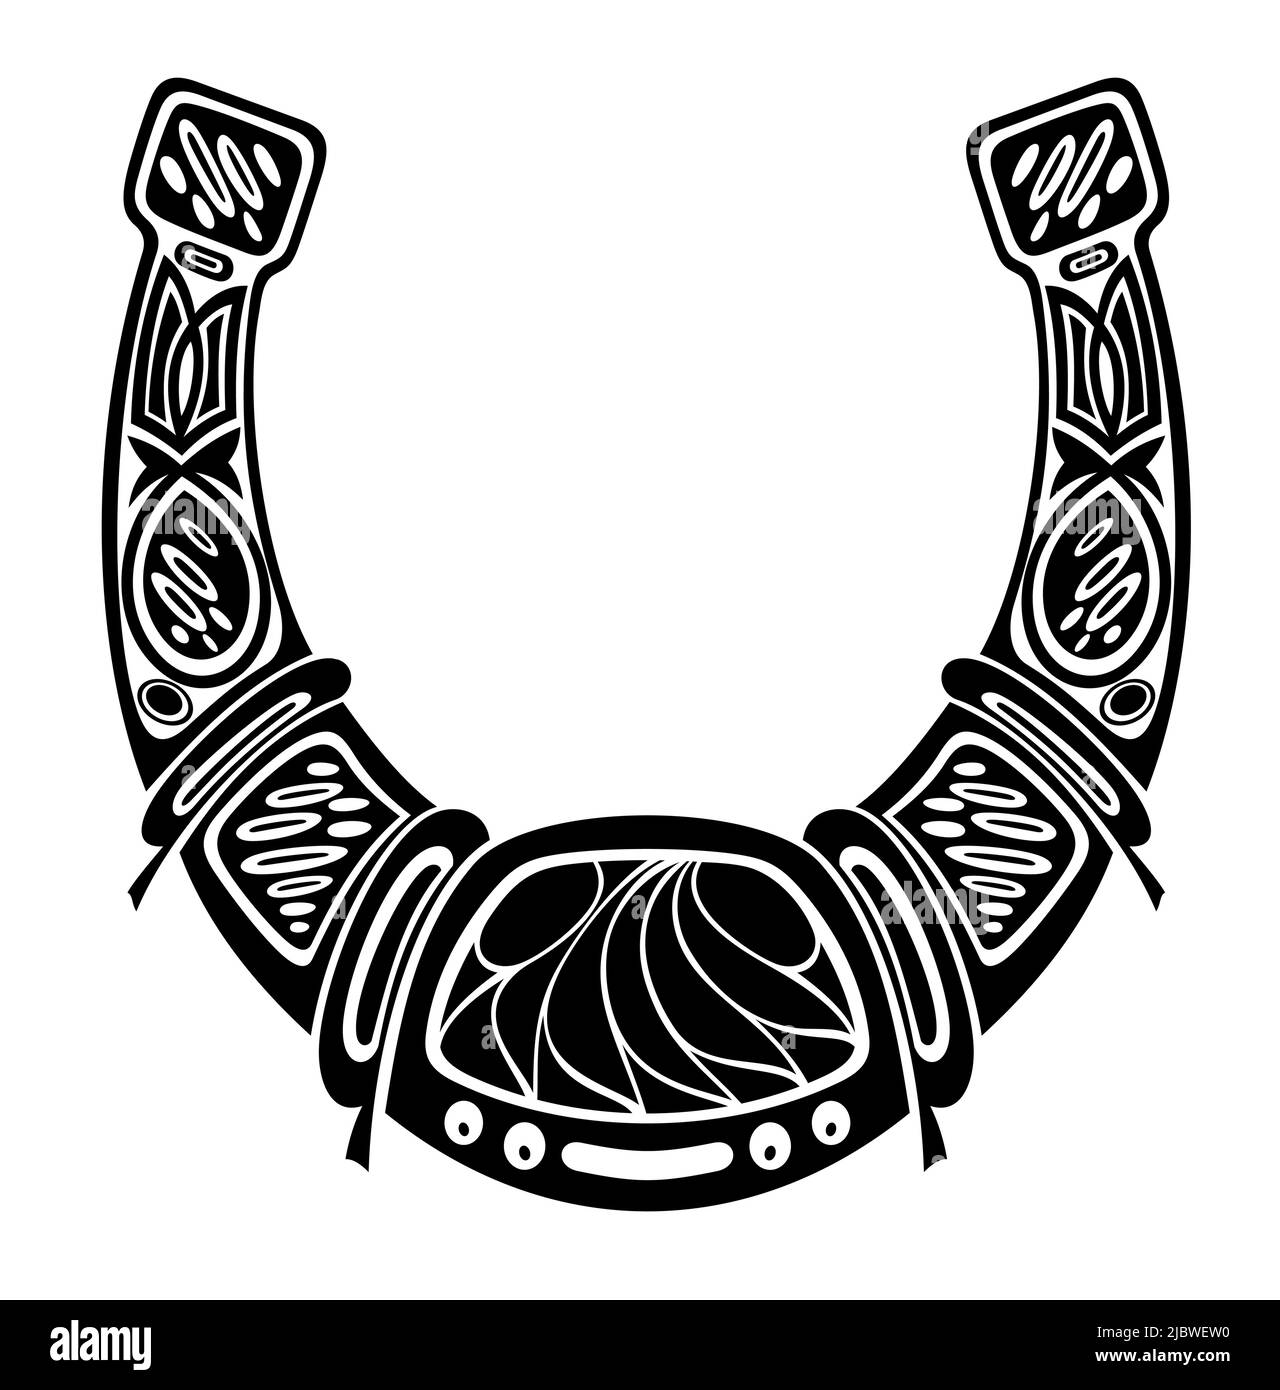 Hand drawn lucky horseshoe for your design Stock Vector